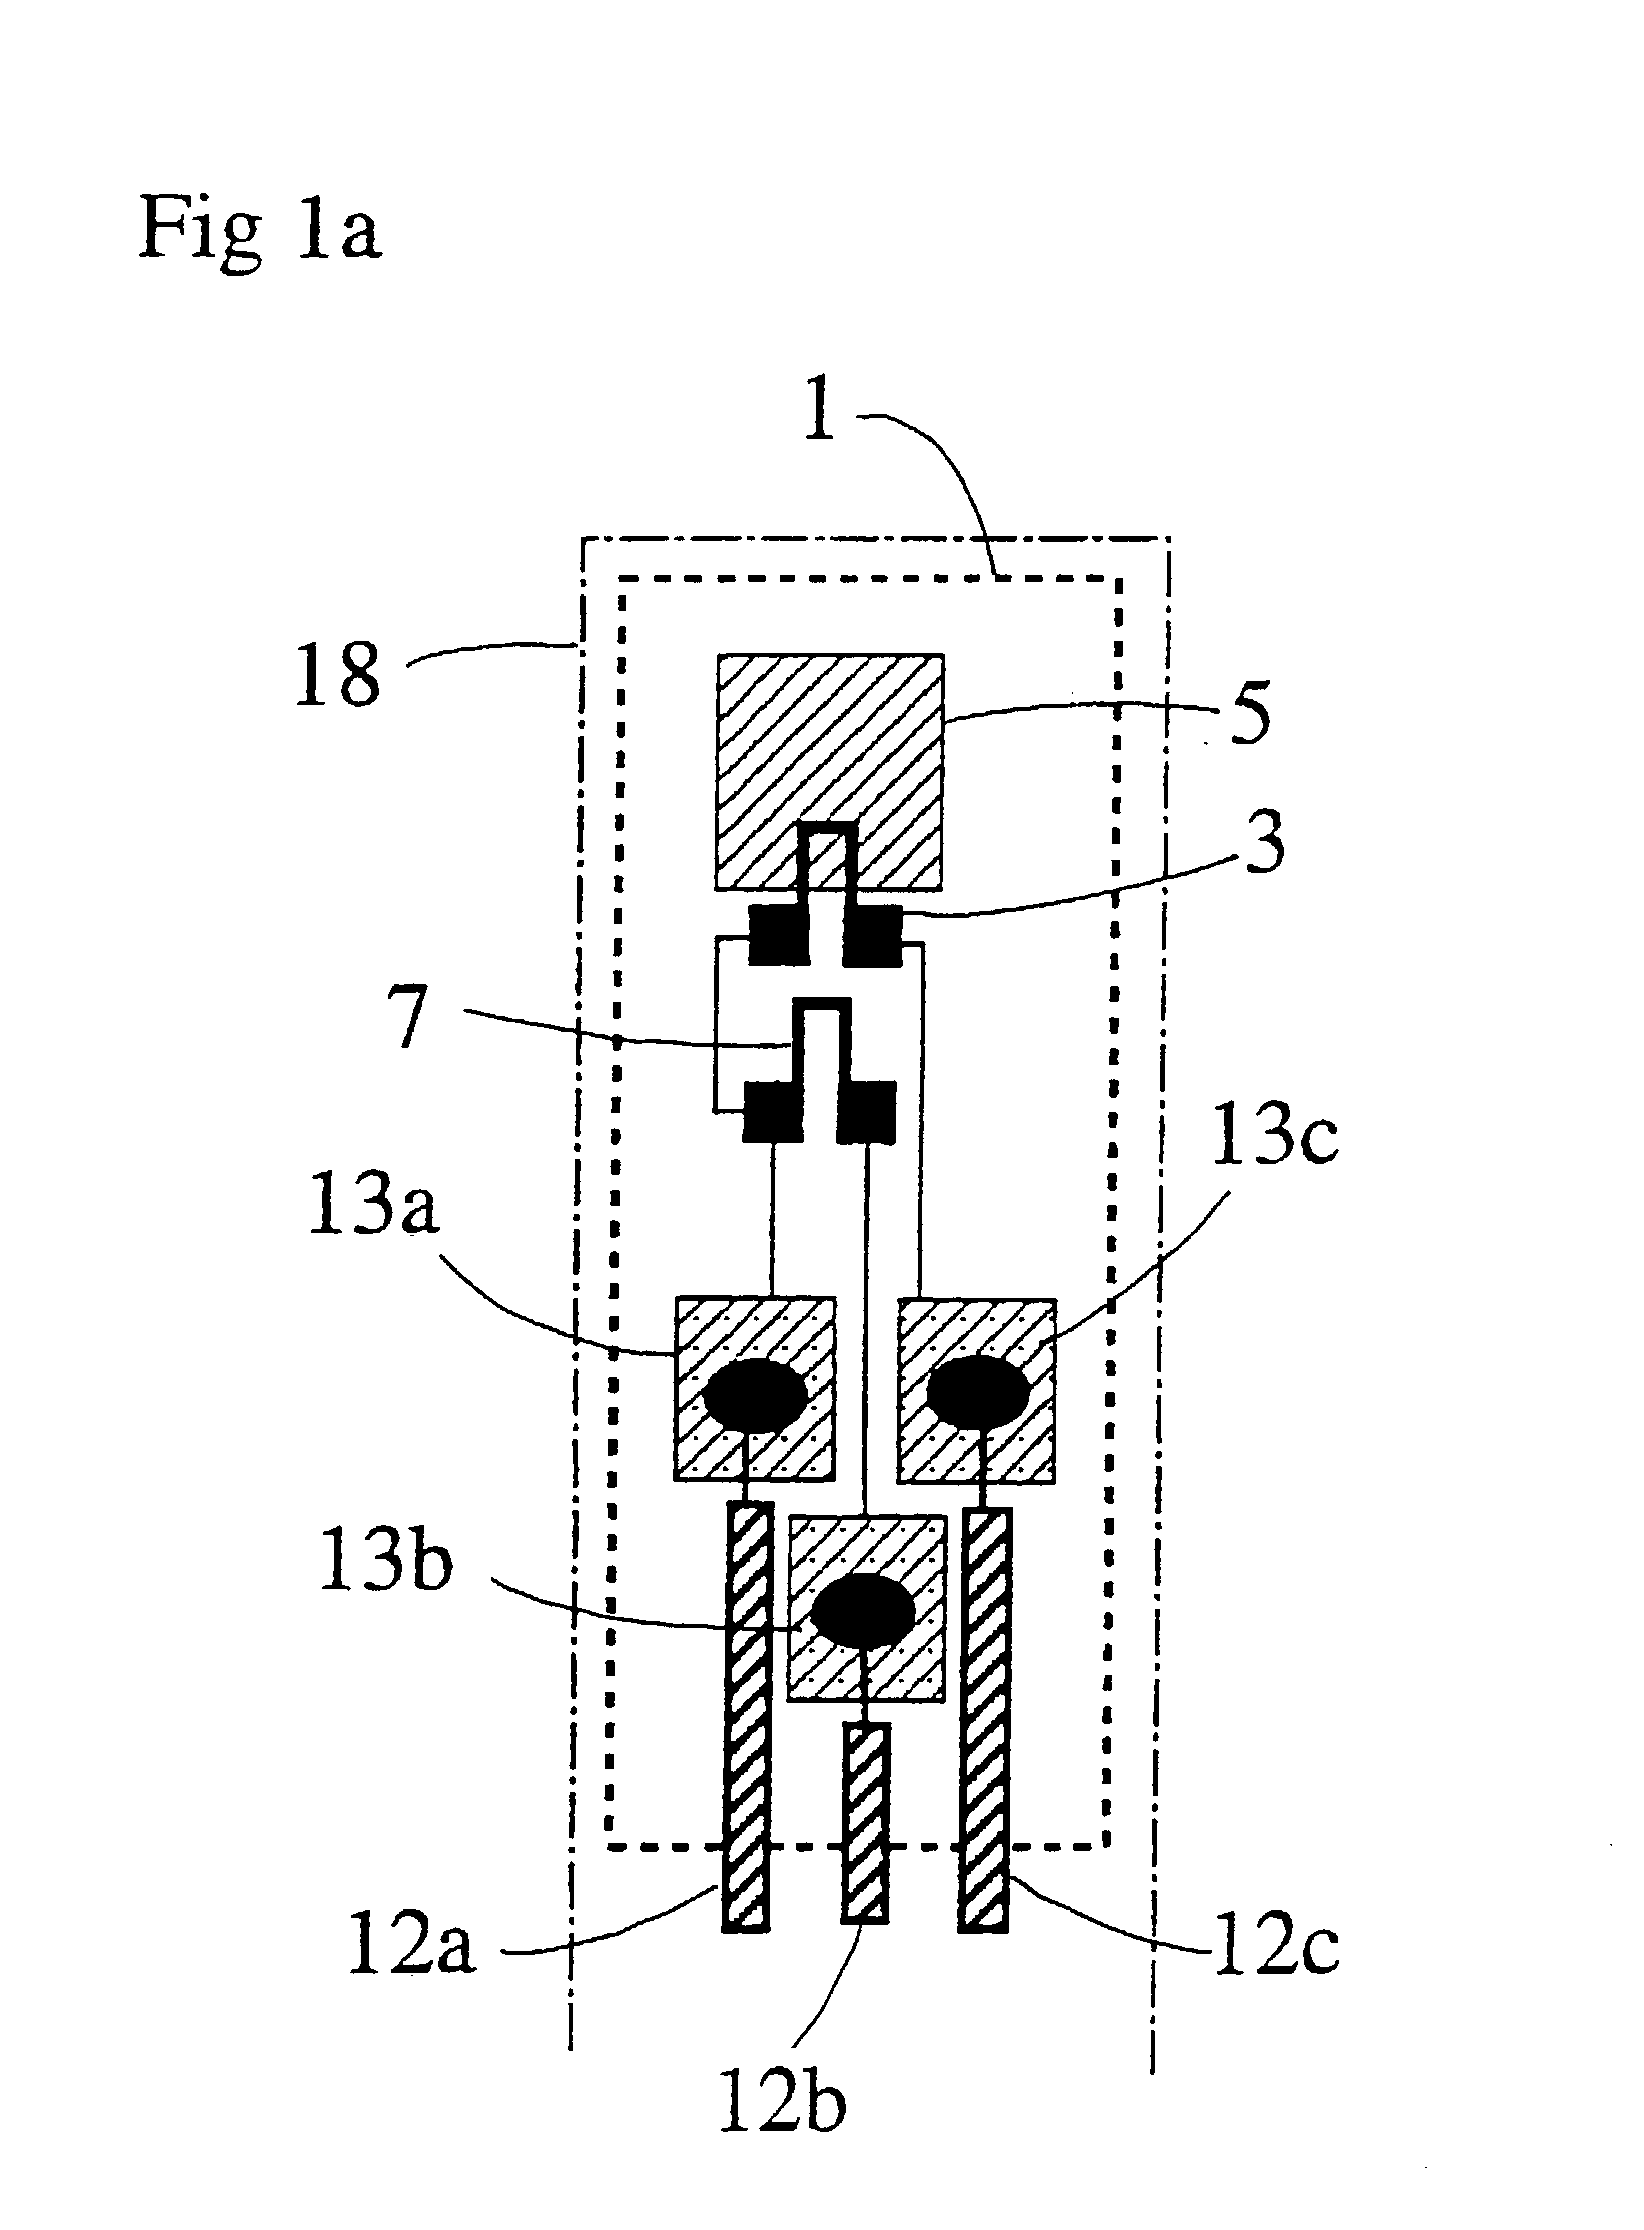 Sensing device and a method for measuring at least two features, for example pressure and/or flow rate and temperature